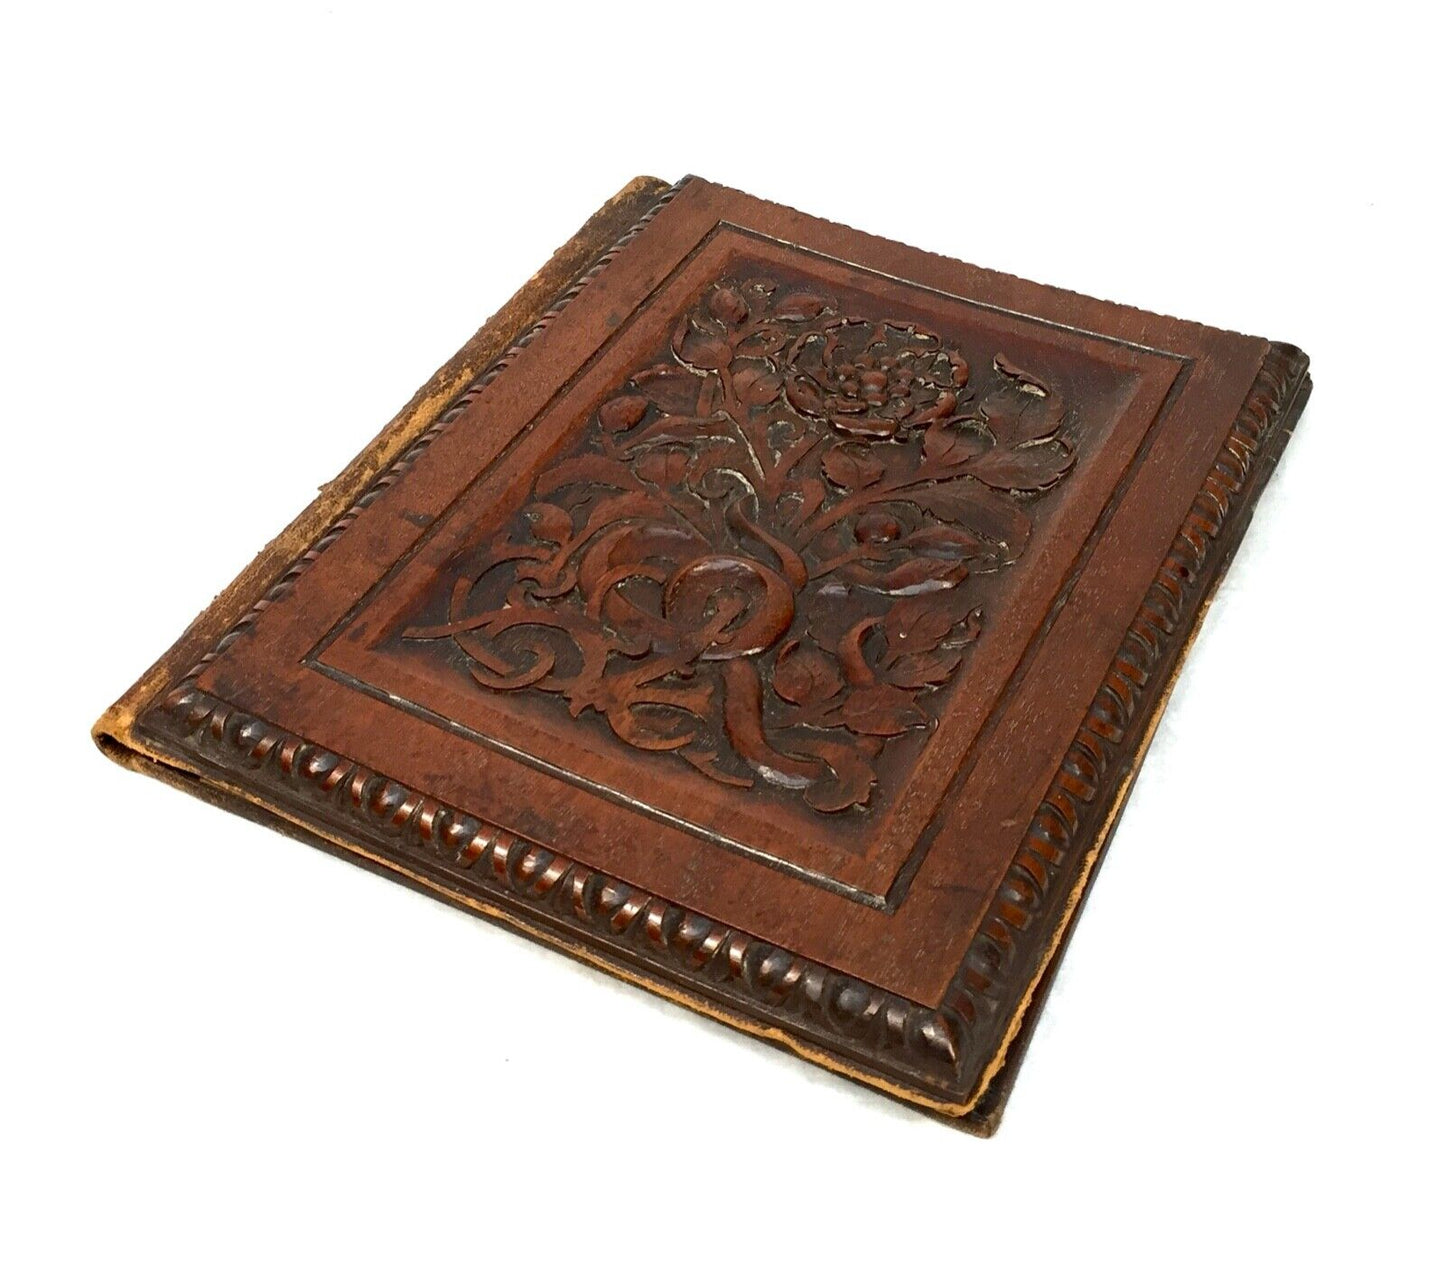 Antique Stationery - Wooden Covered Blotter / Notebook Paper Holder / Victorian